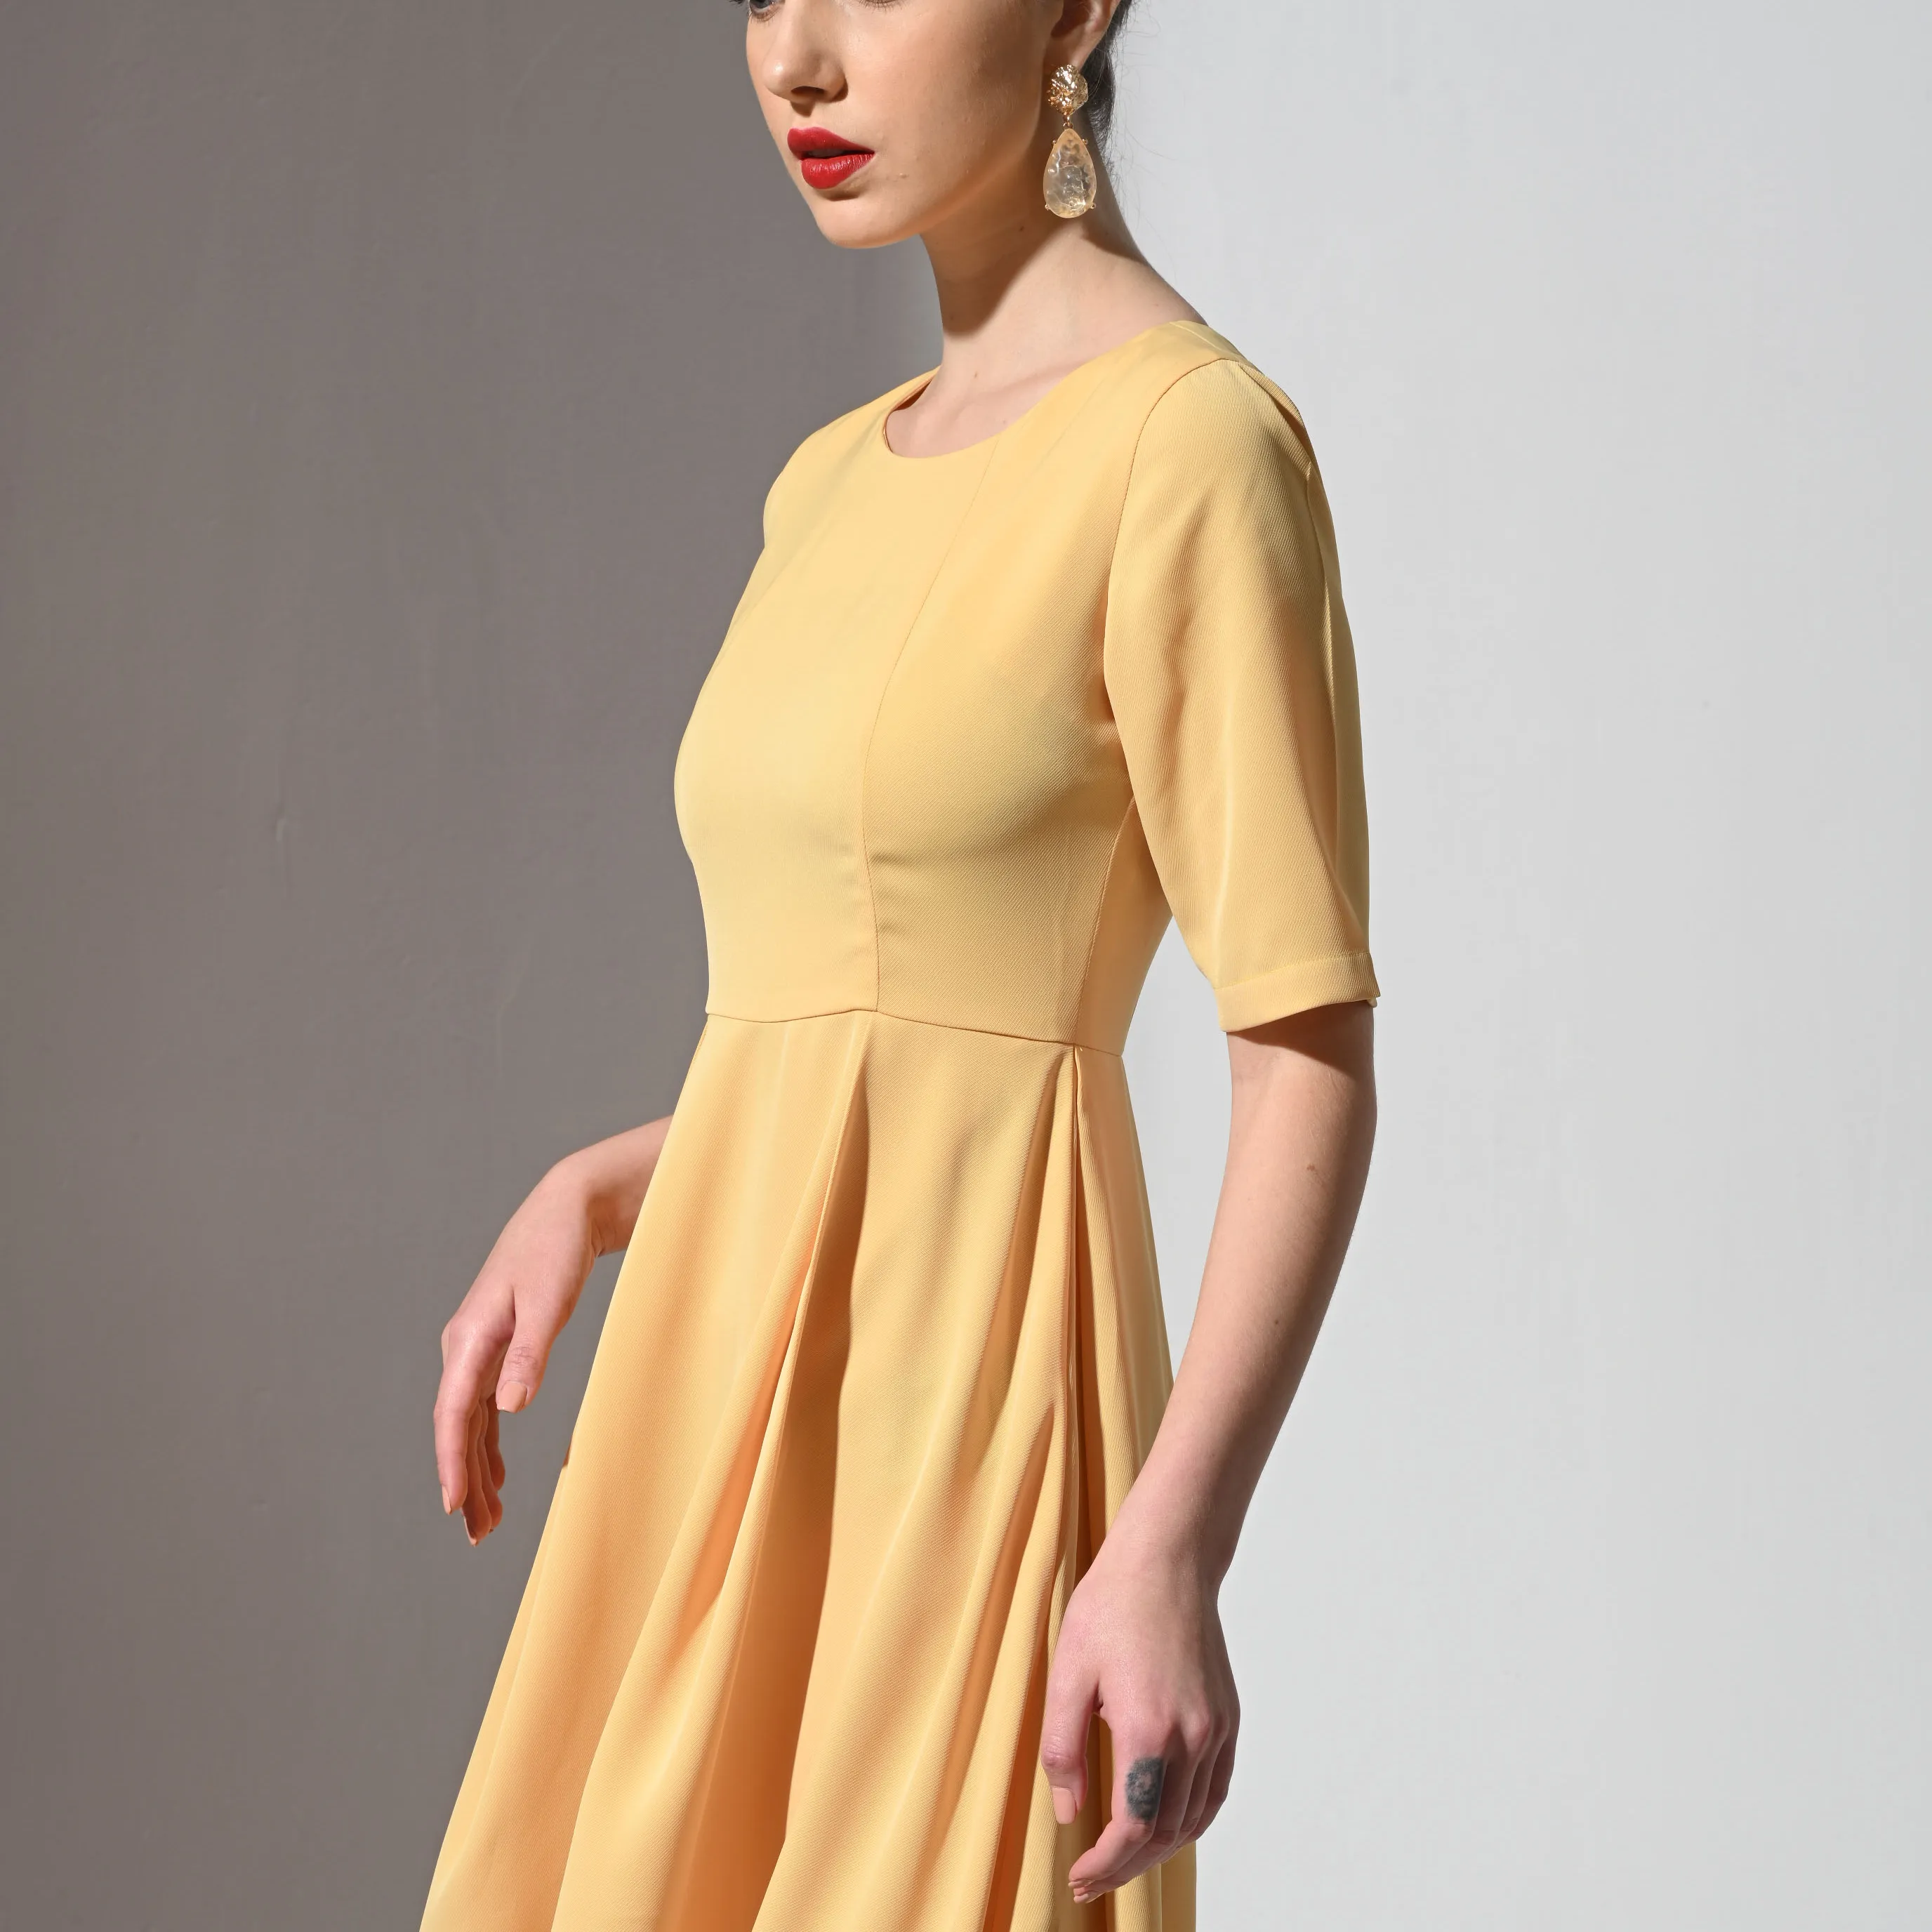 Wholesale Women's Fashion Luxury Casual O-neck Yellow Dresses Women's Business Clothes